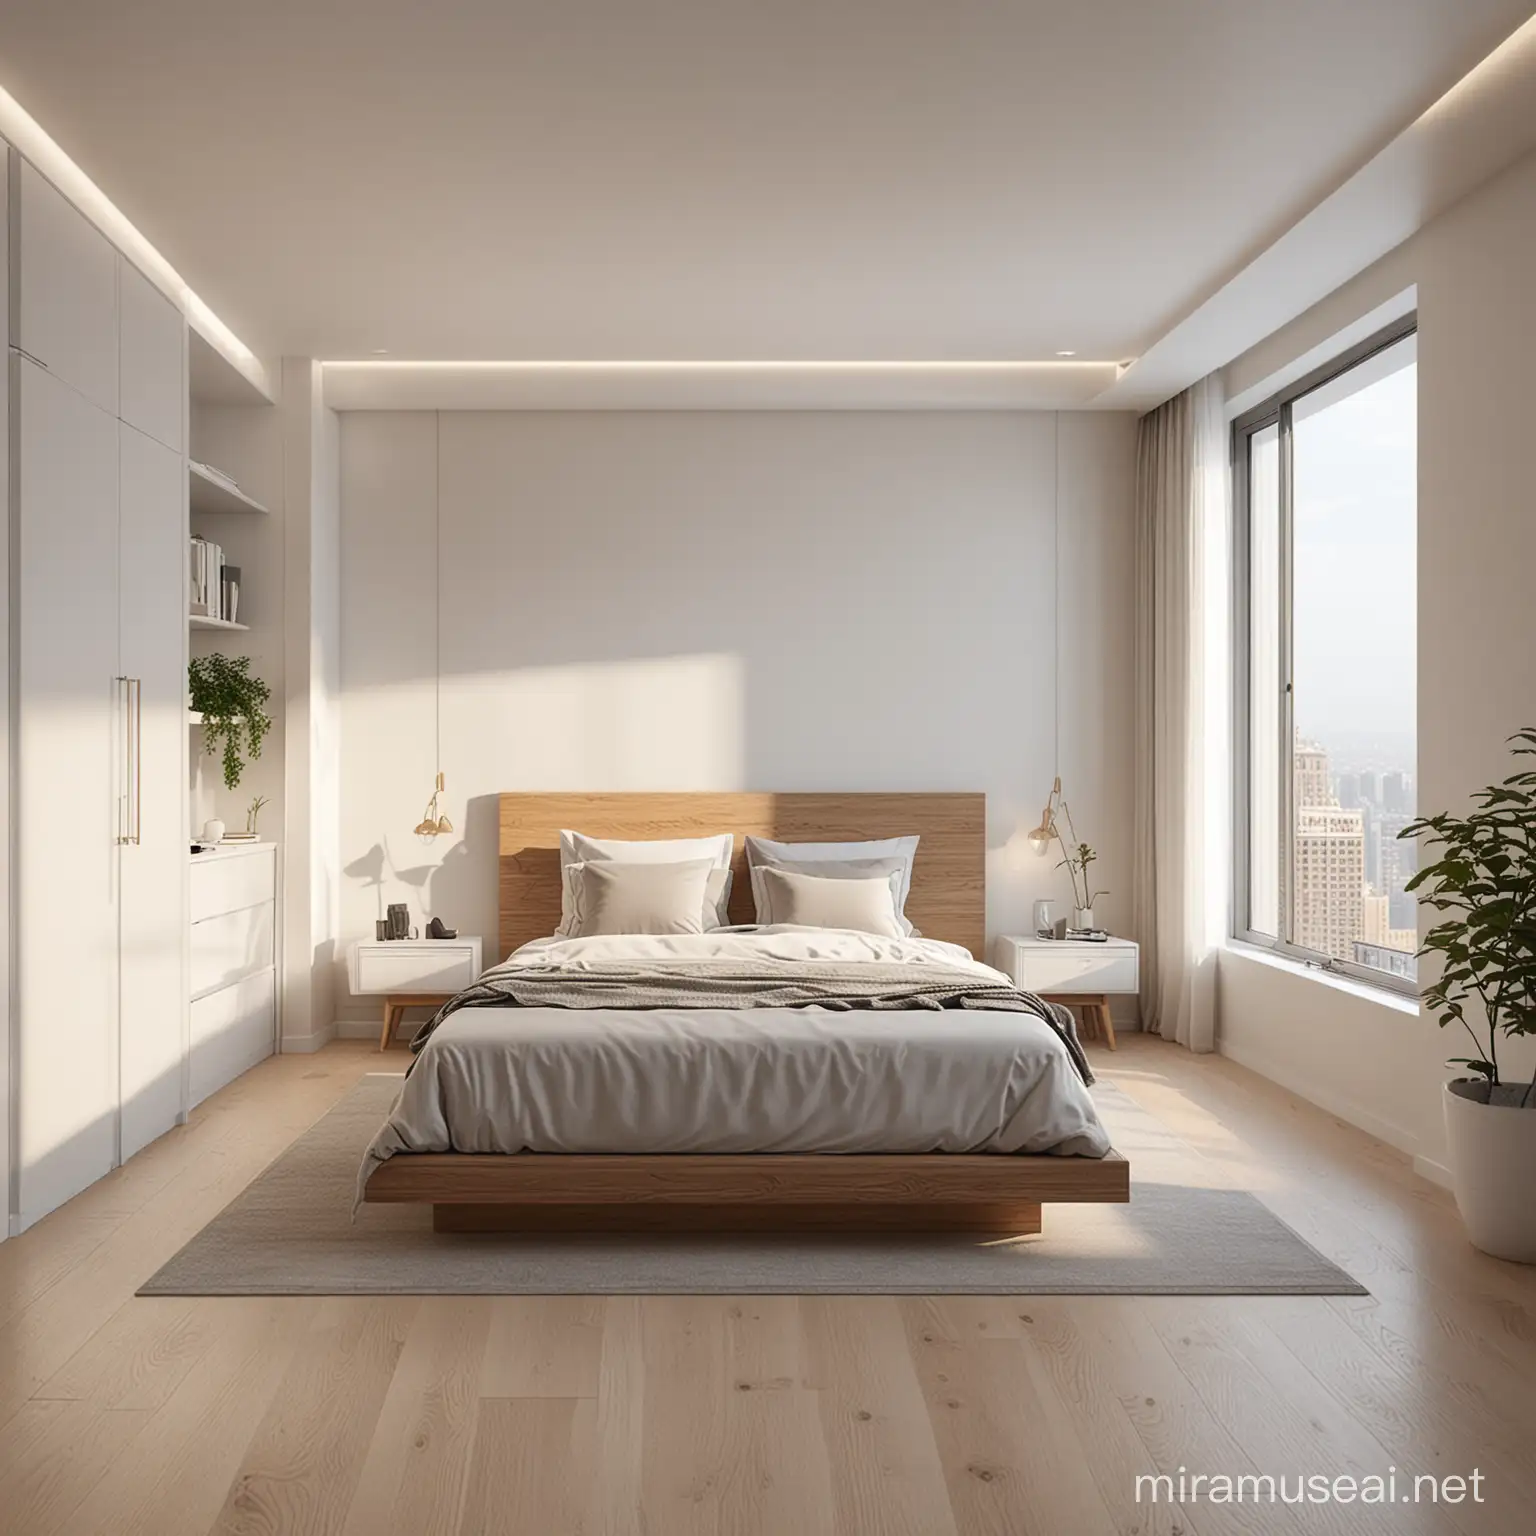 Minimalist Bedroom on the Second Floor of an Apartment